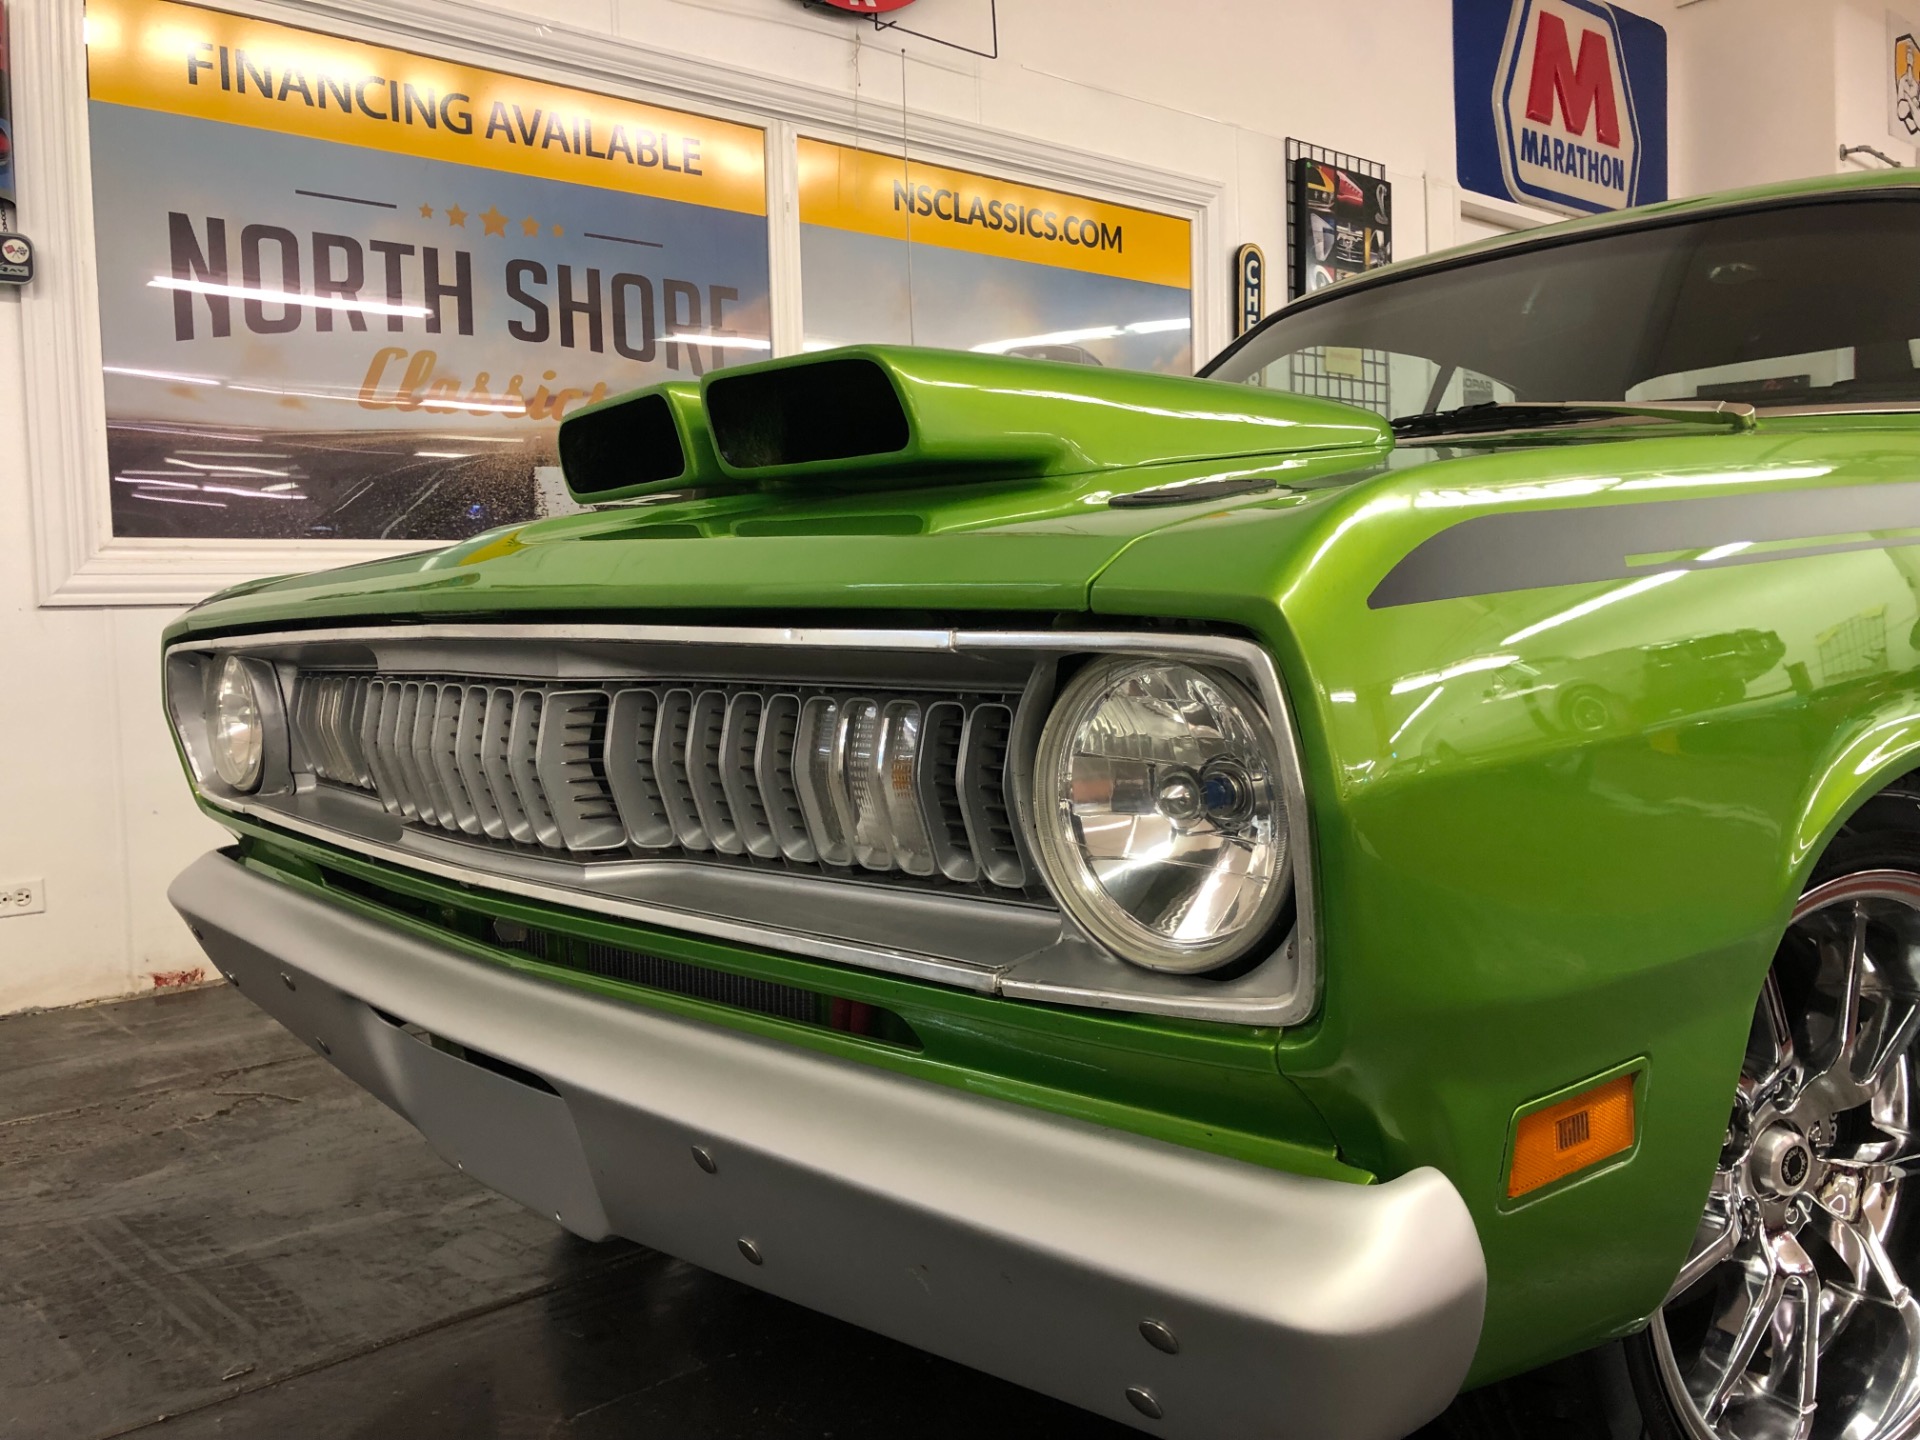 Used 1971 Plymouth Duster -HEMI FUEL INJECTED PRO TOURING MOPAR For Sale (Sold) North Shore Classics Stock #715724NSC pic pic